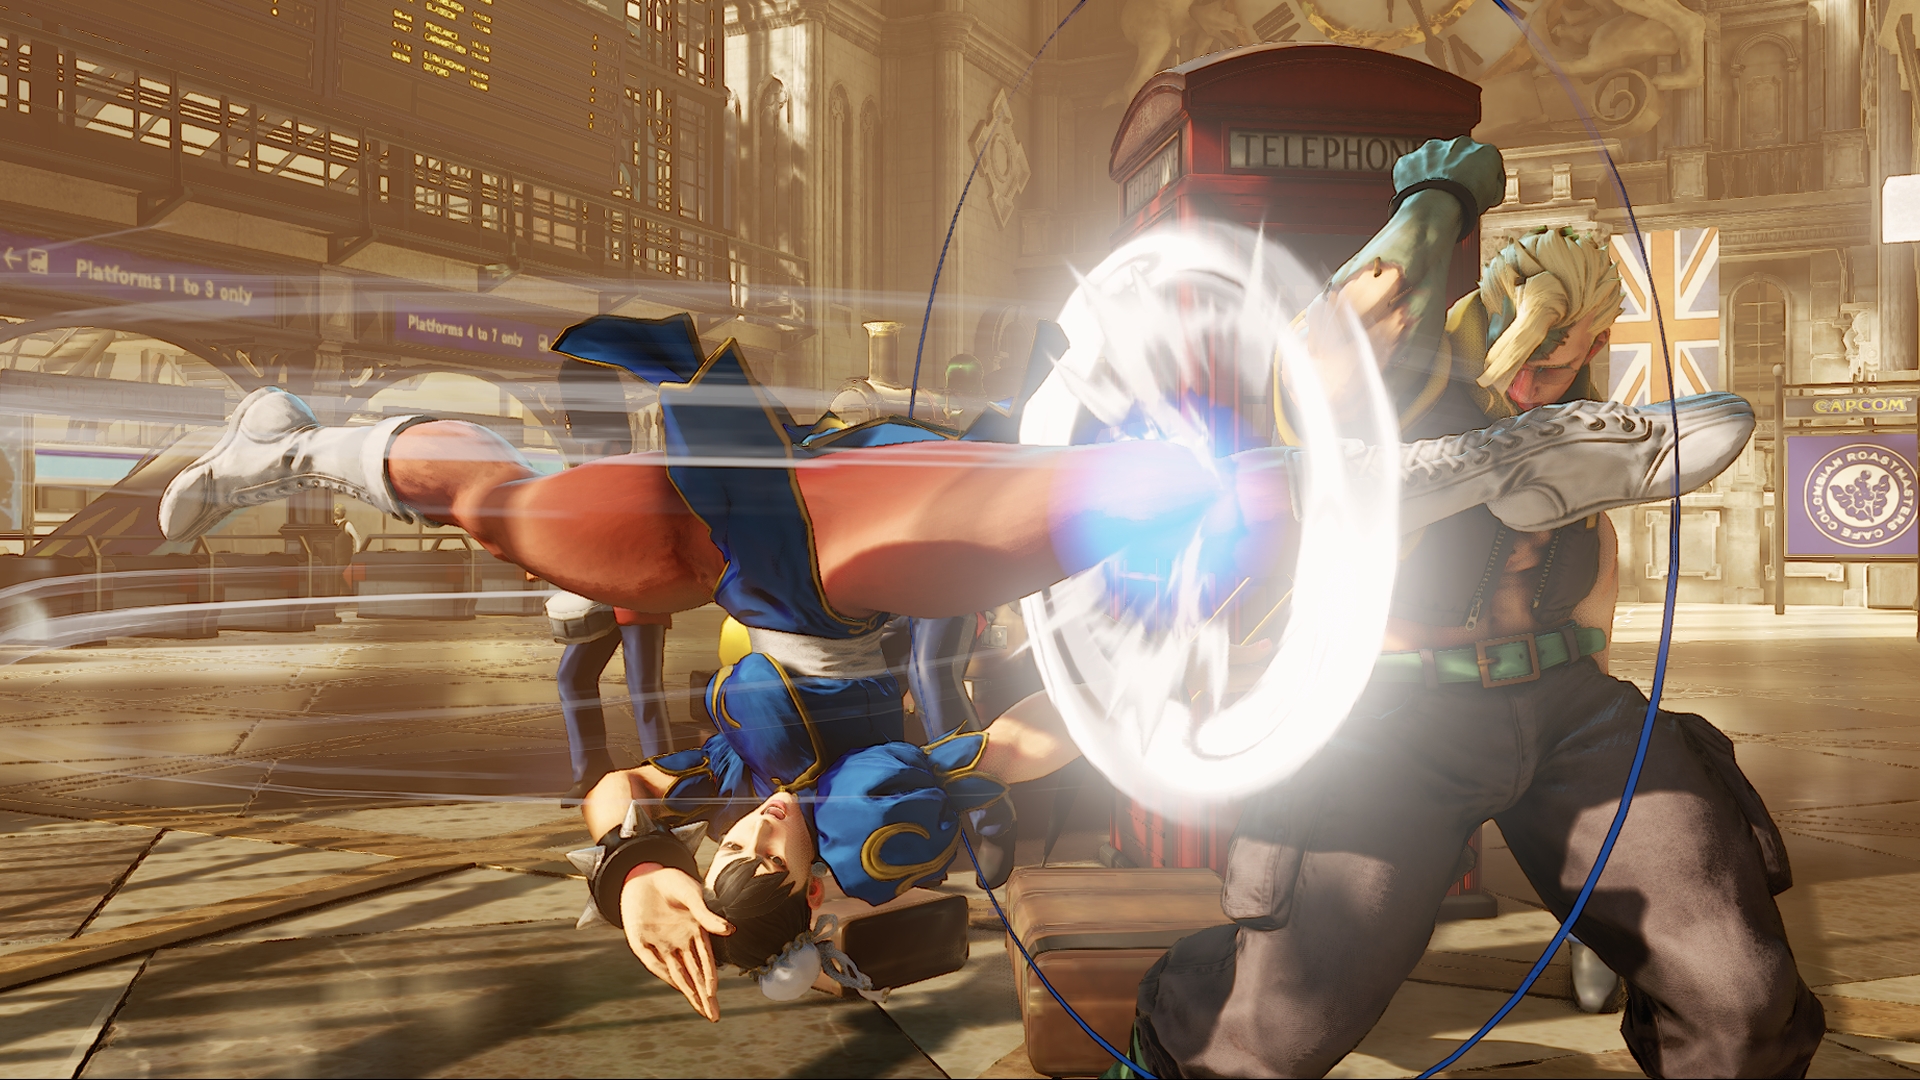 Street Fighter V trailer confirms Cammy and Birdie